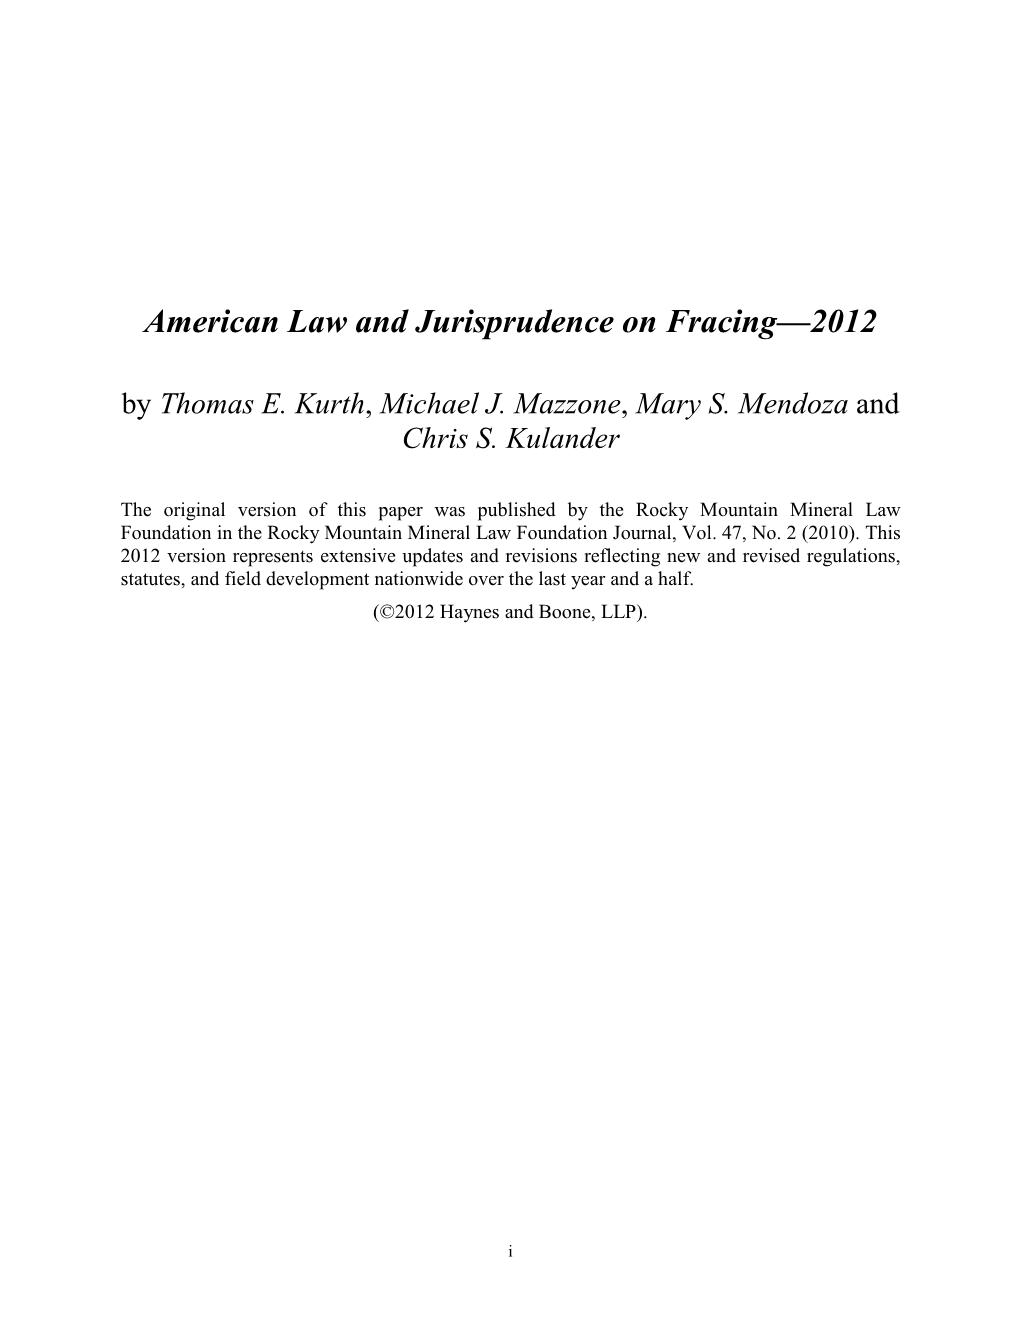 American Law and Jurisprudence on Fracing—2012 by Thomas E